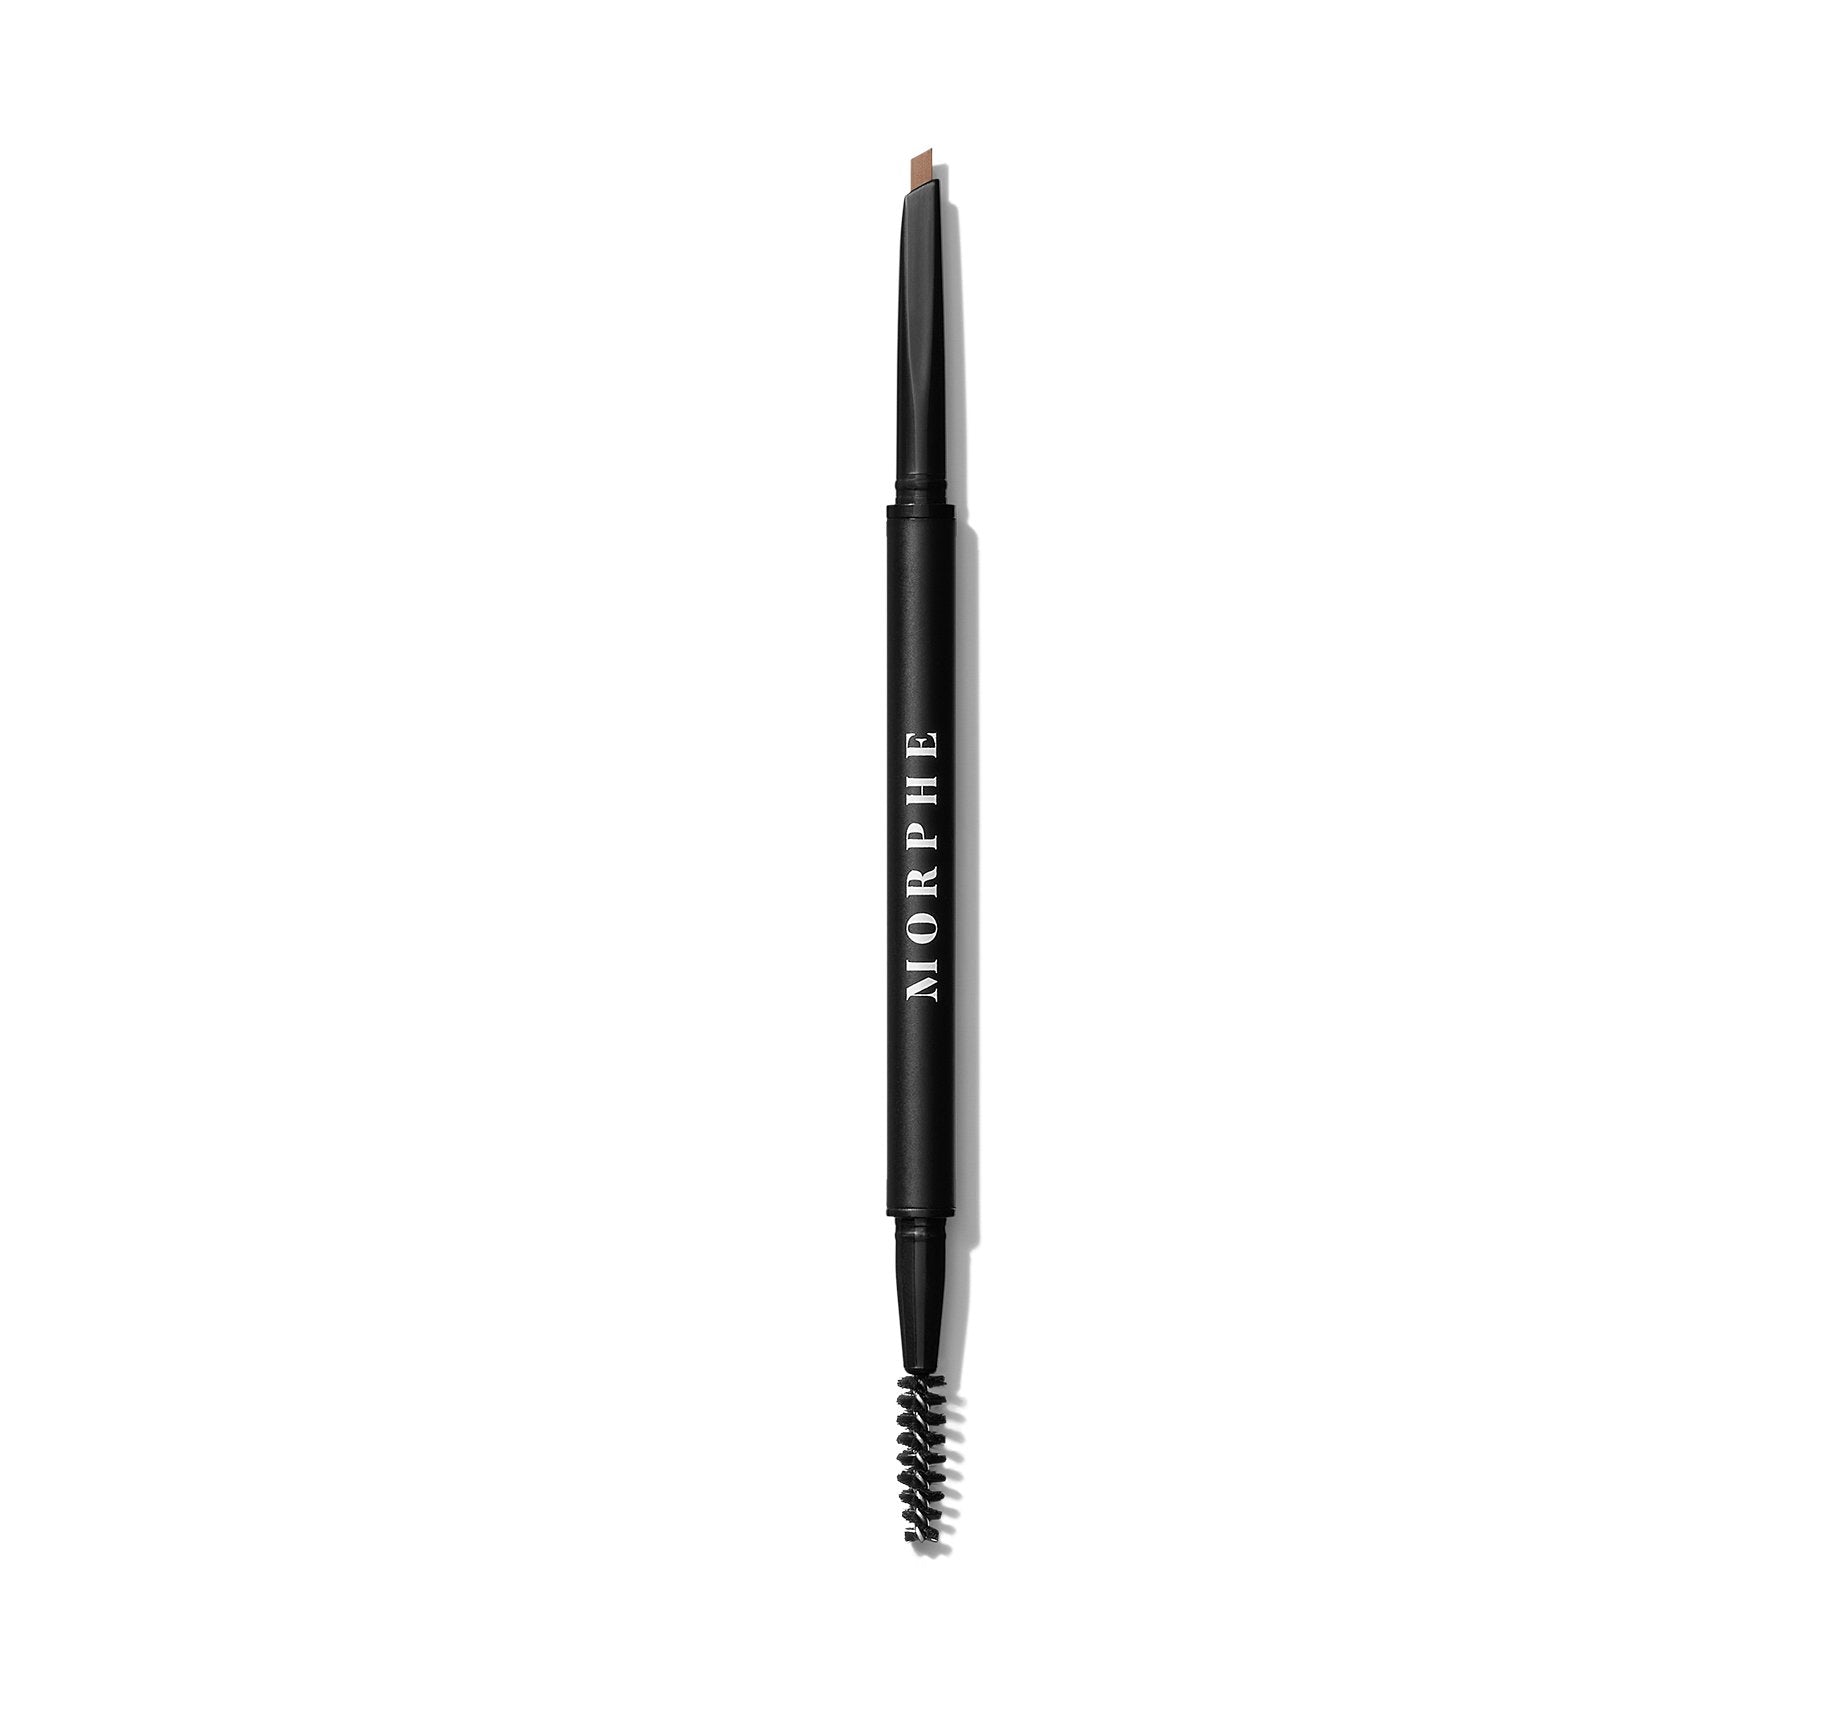 Definer Dual-Ended Brow Pencil & Spoolie - Almond - Image 1